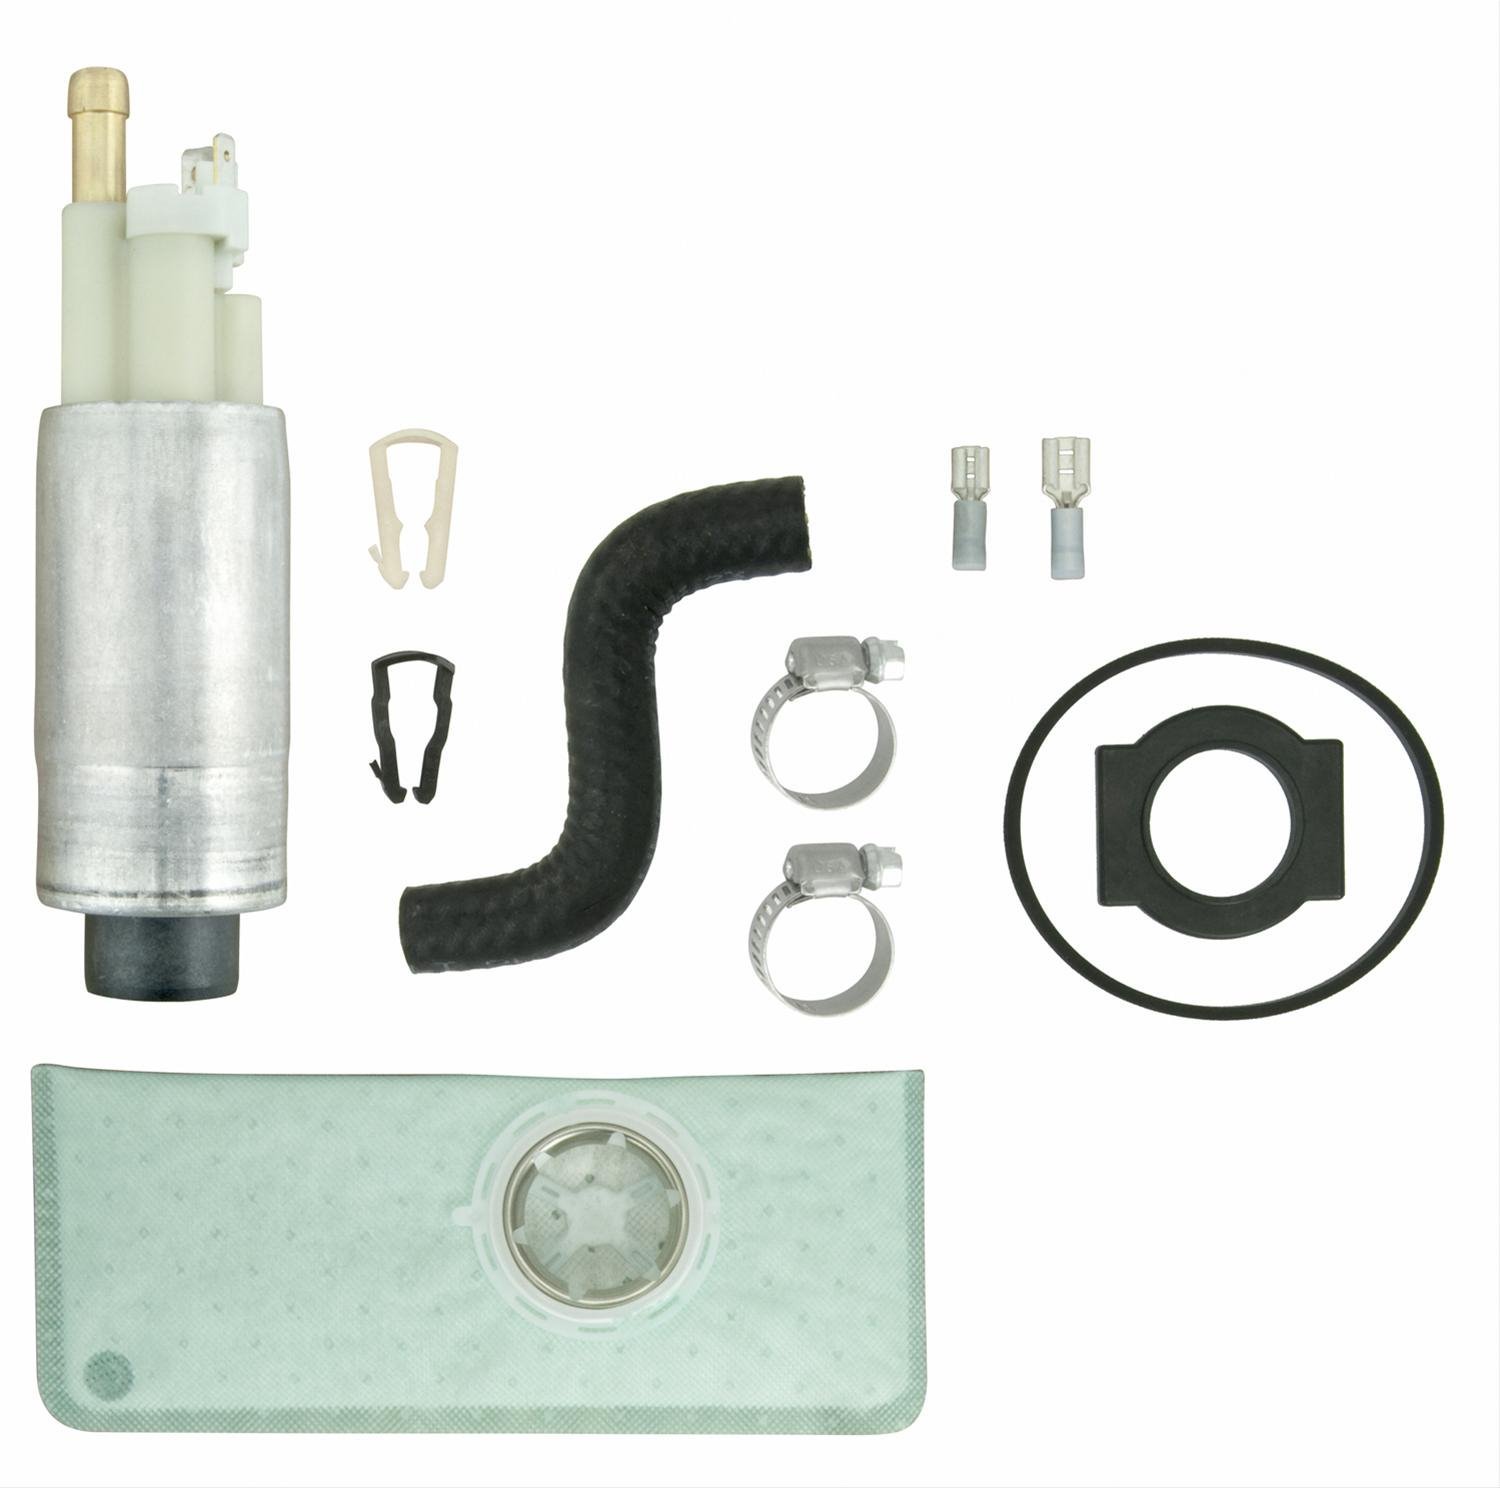 EFI In-Tank Electric Fuel Pump And Strainer Set for 1991-1997 Ford Mustang